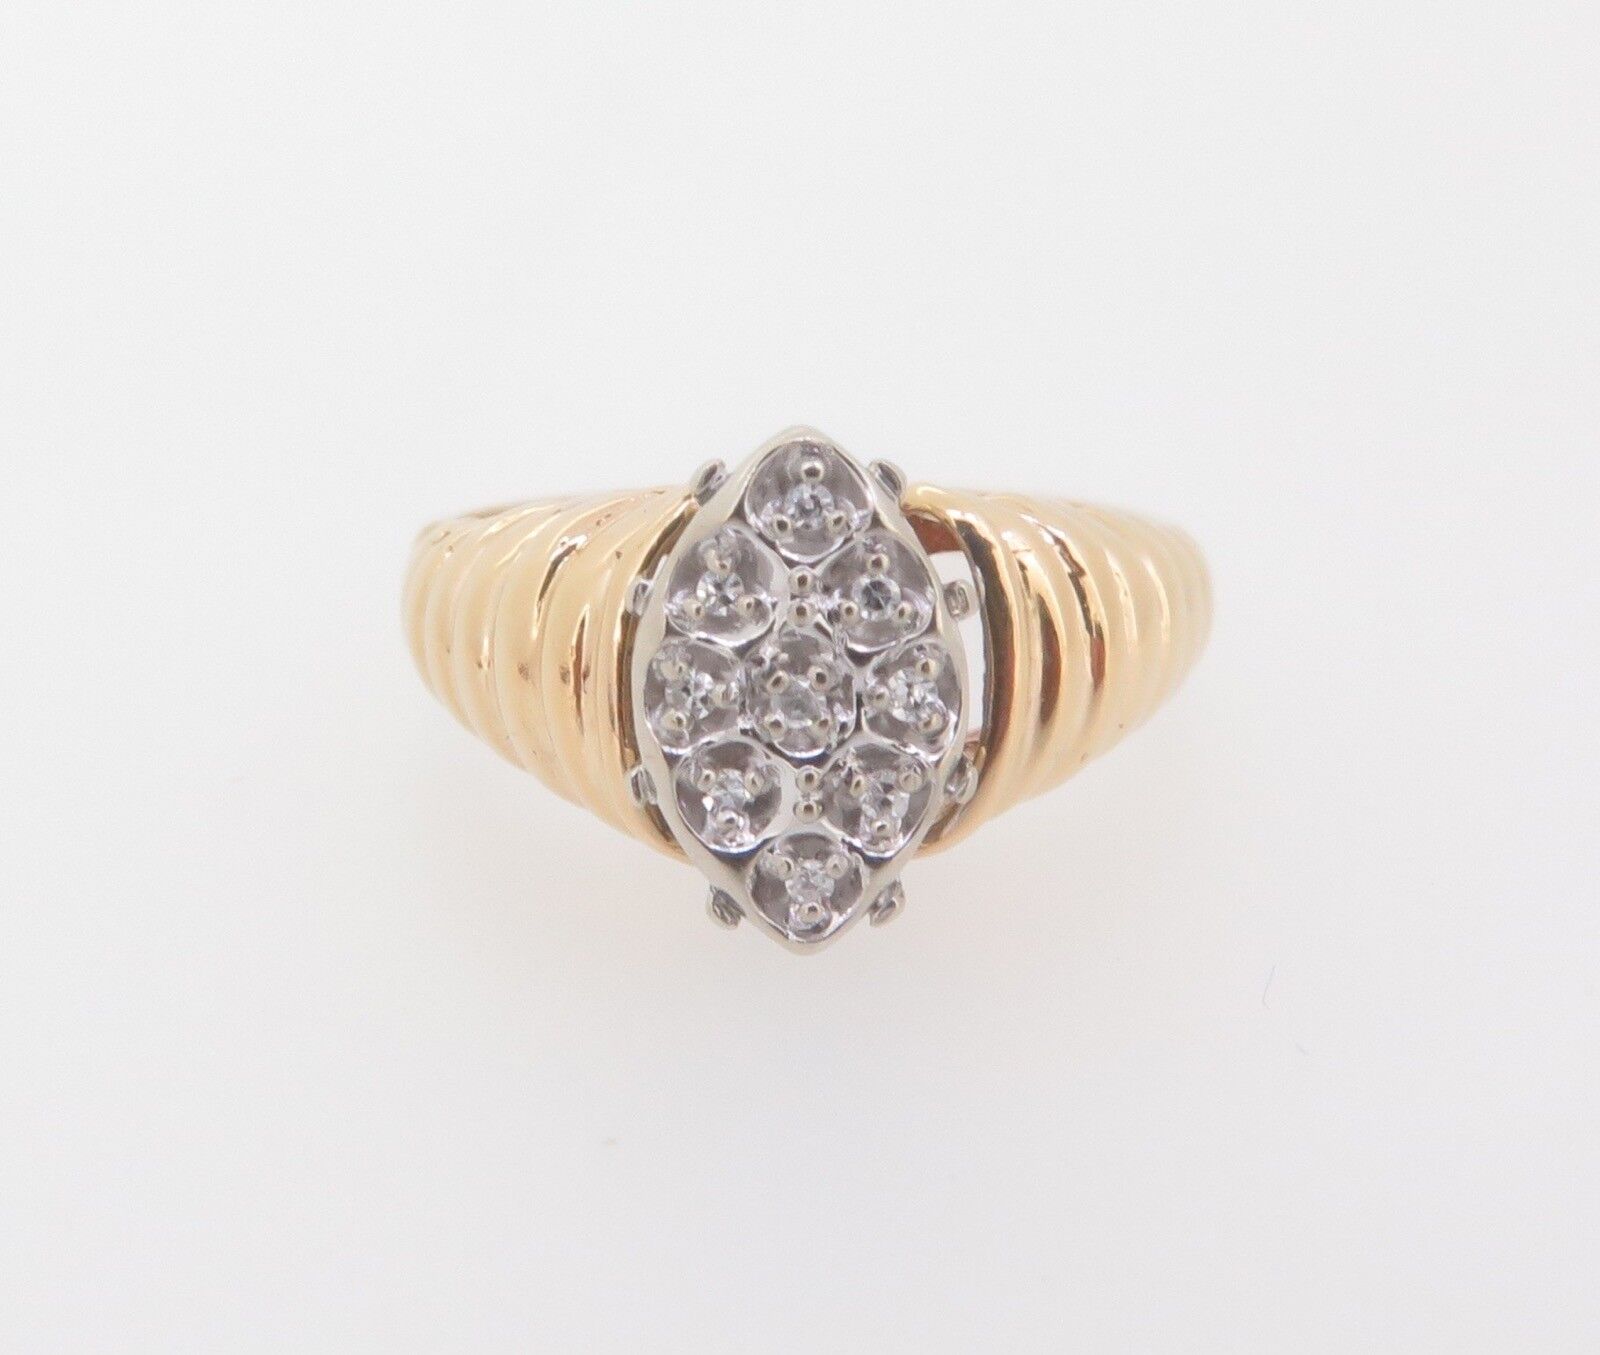 .A Beautiful 10k Gold 0.45ct Diamond Cluster Dress Ring Size K1/2 VAL $1365 